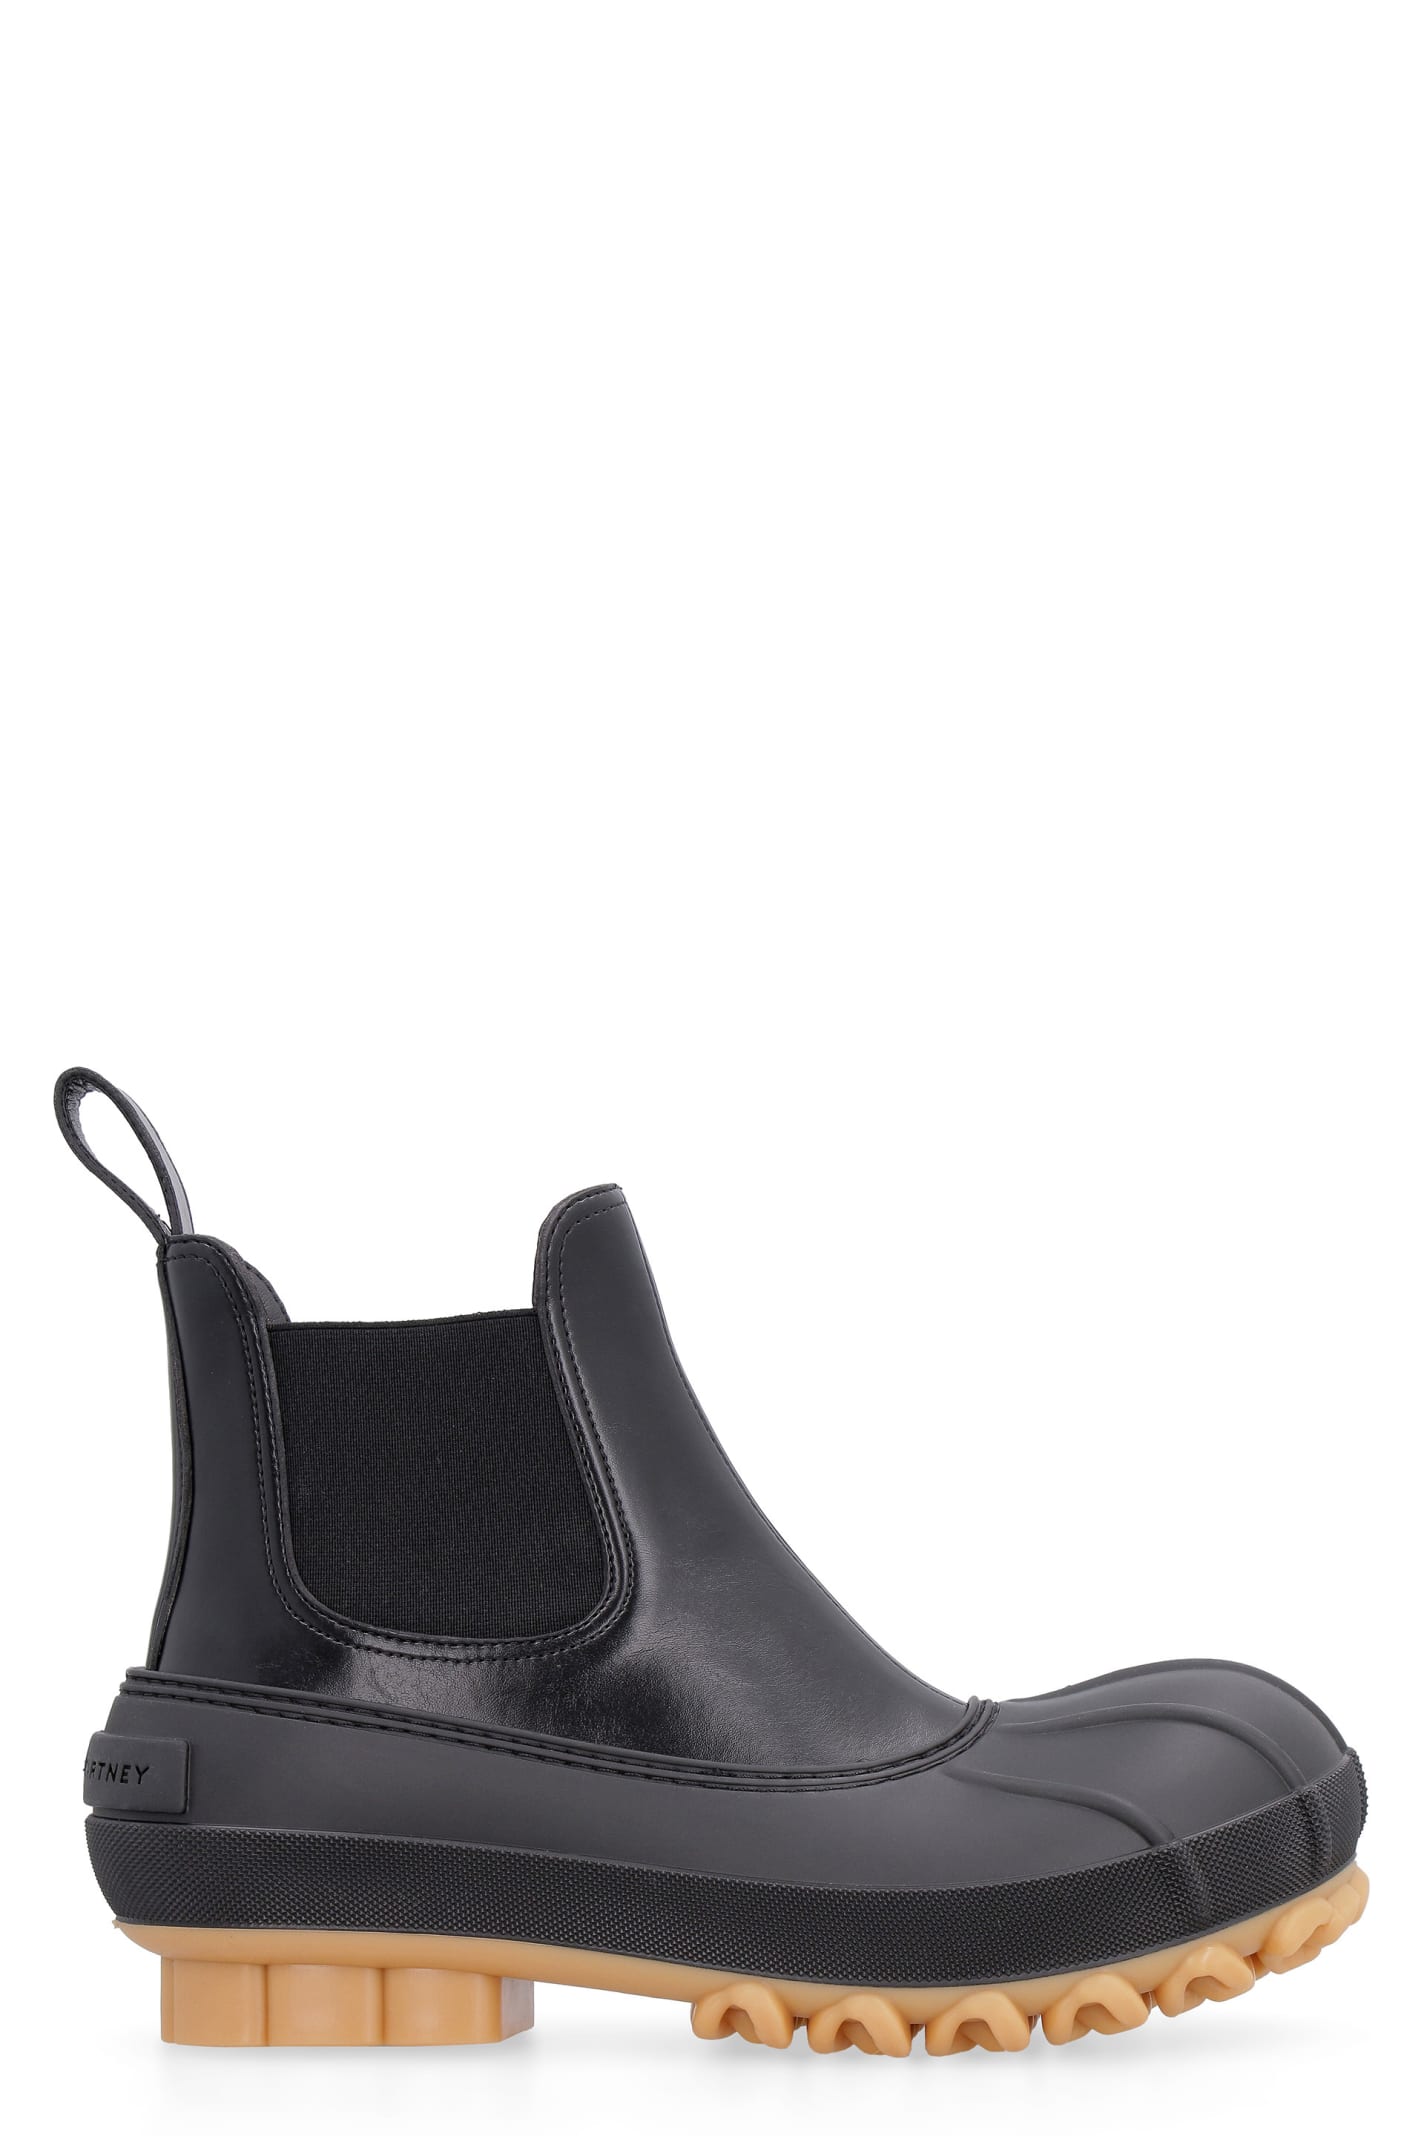 Stella McCartney Duck City Ankle Boots